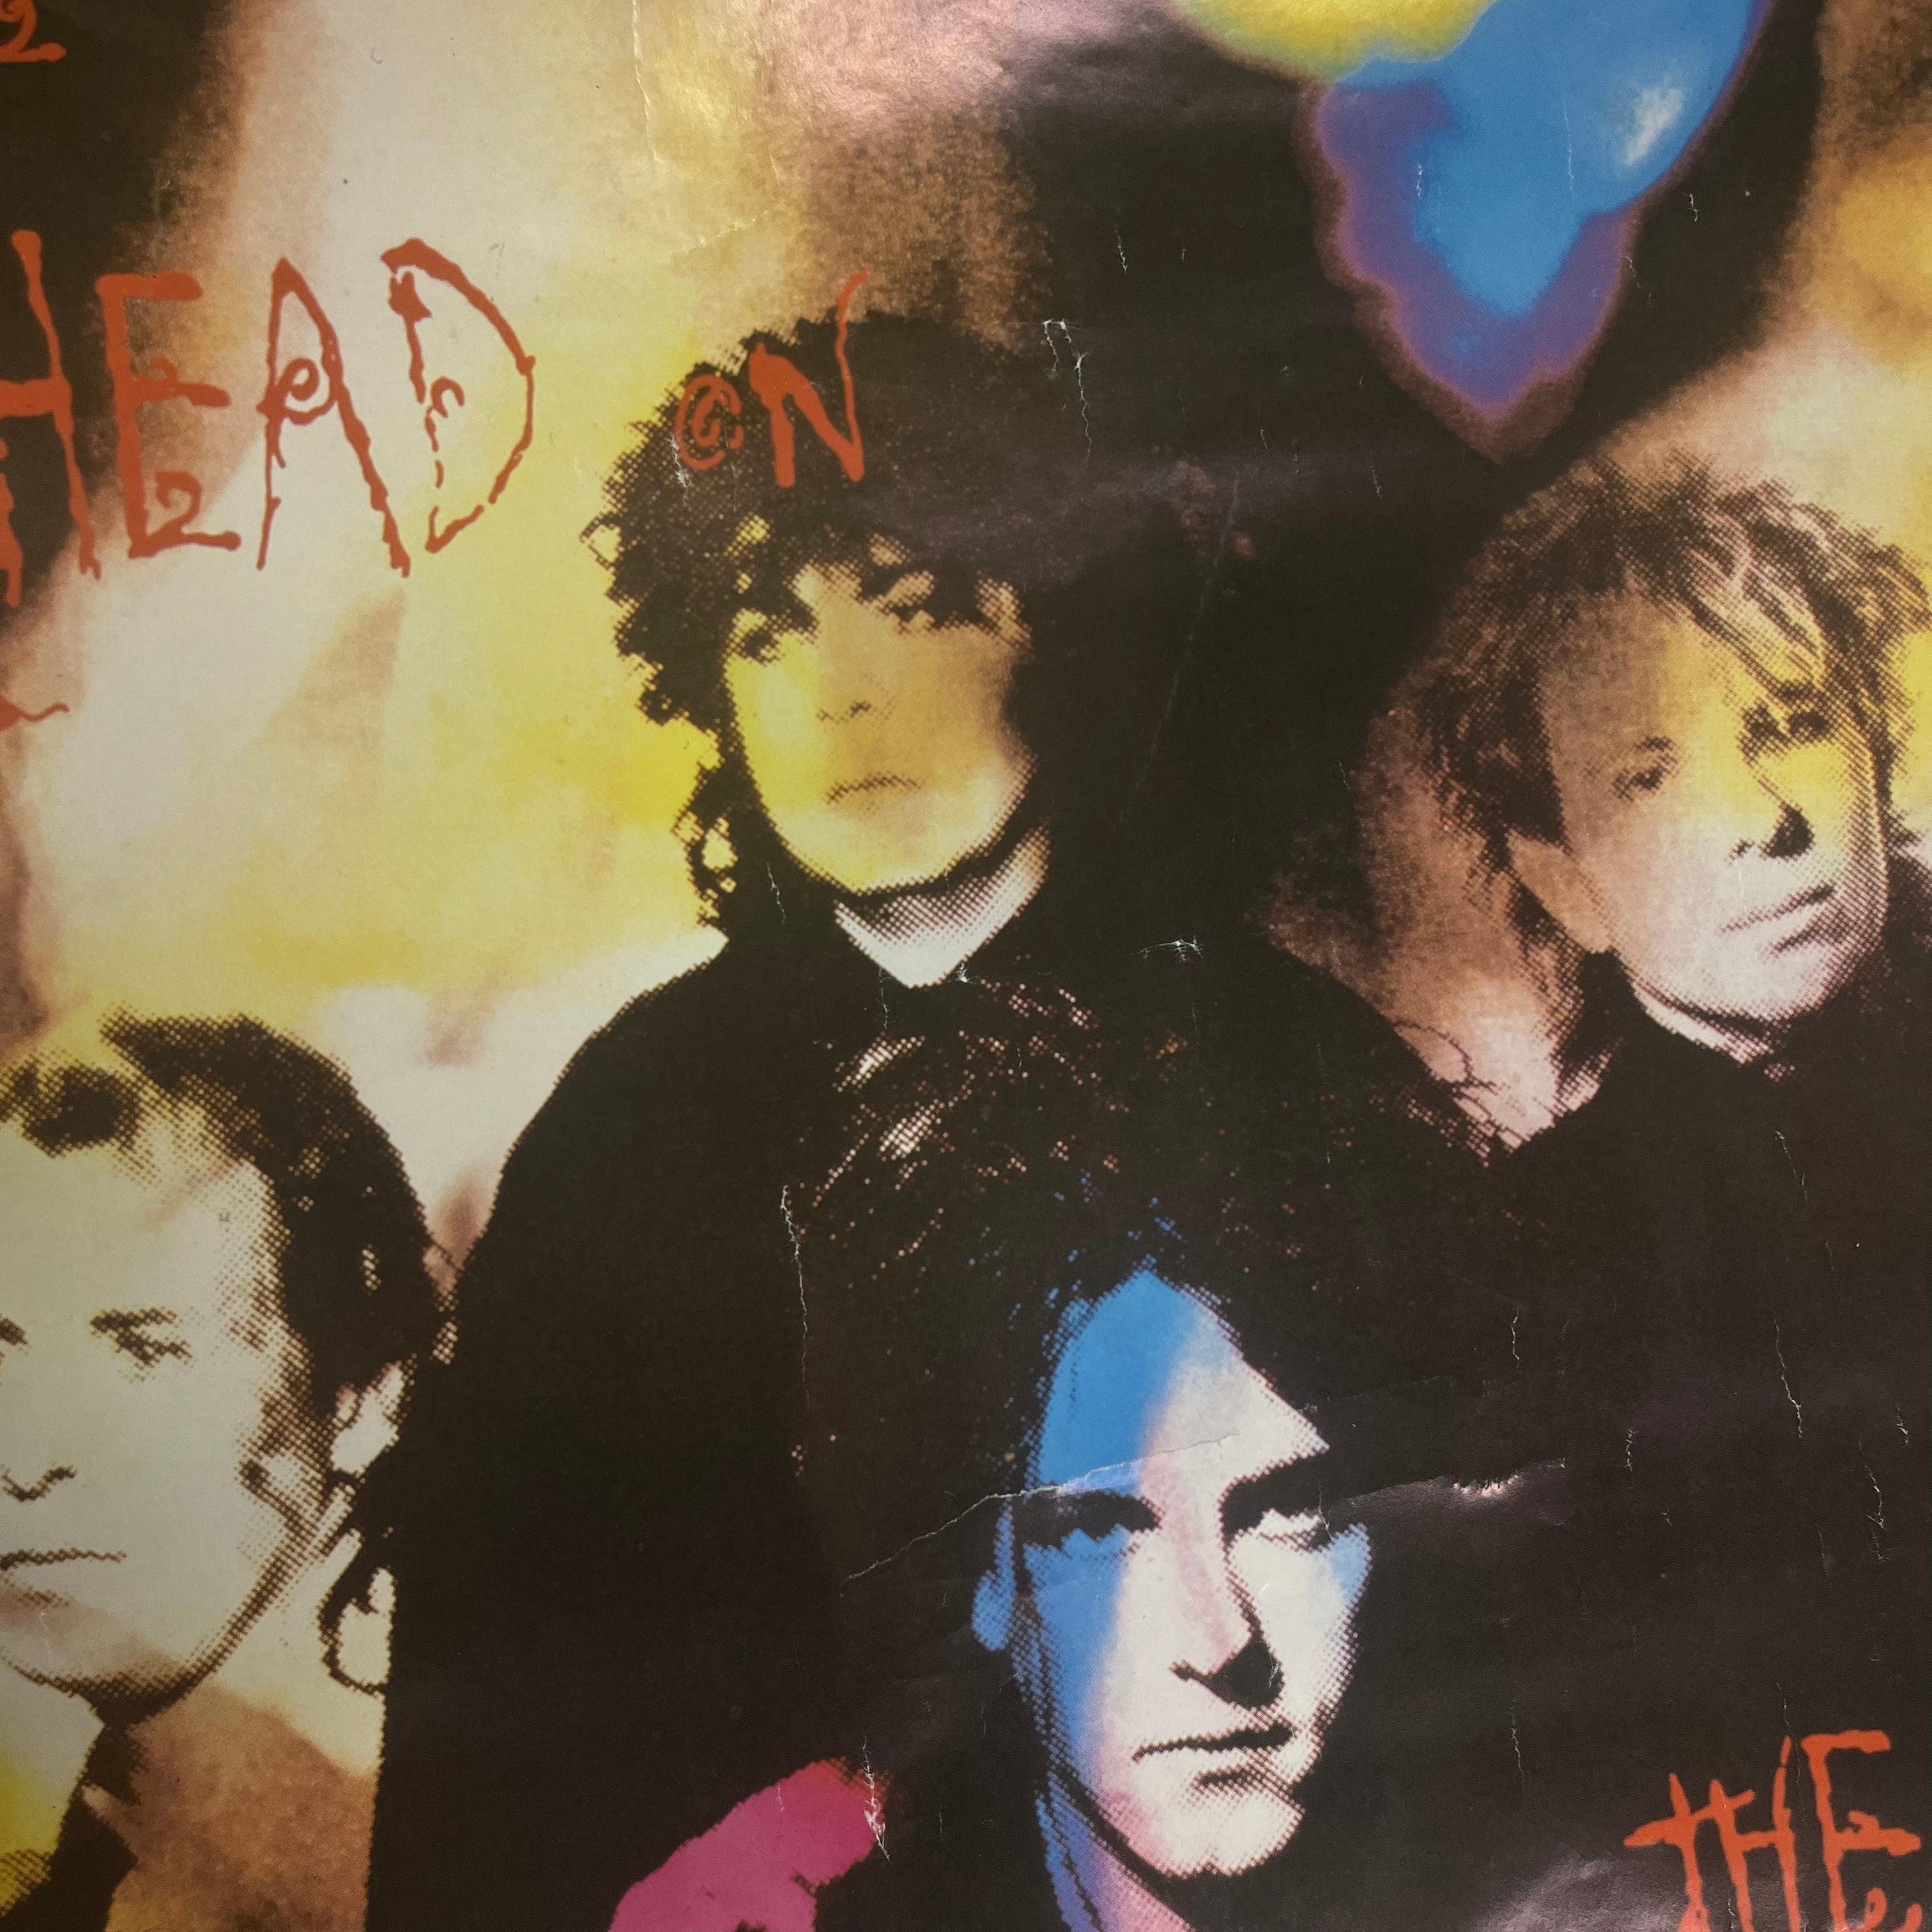 The Cure – The Head On The Door